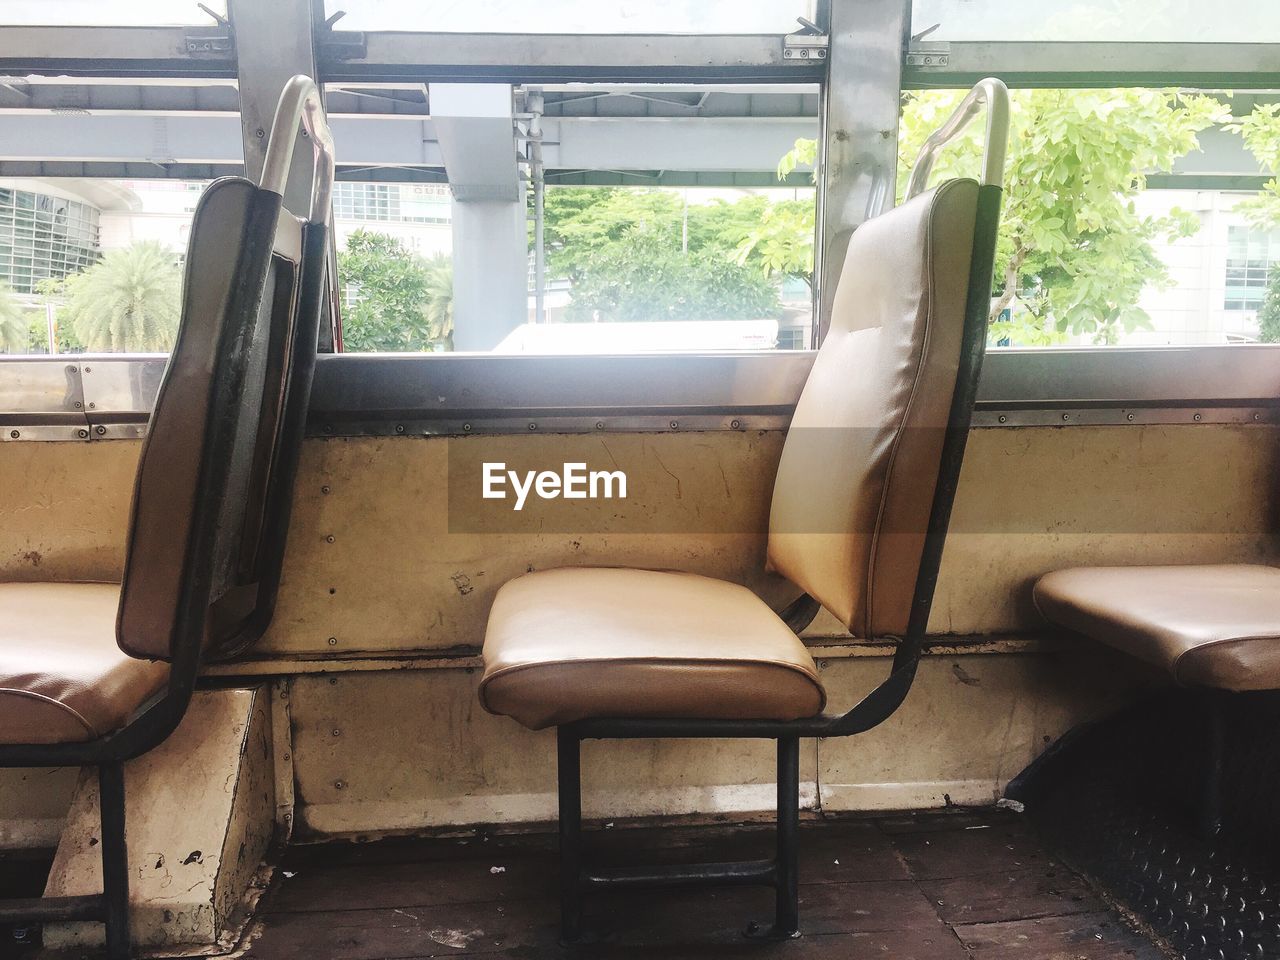 EMPTY CHAIRS AND TRAIN IN WINDOW